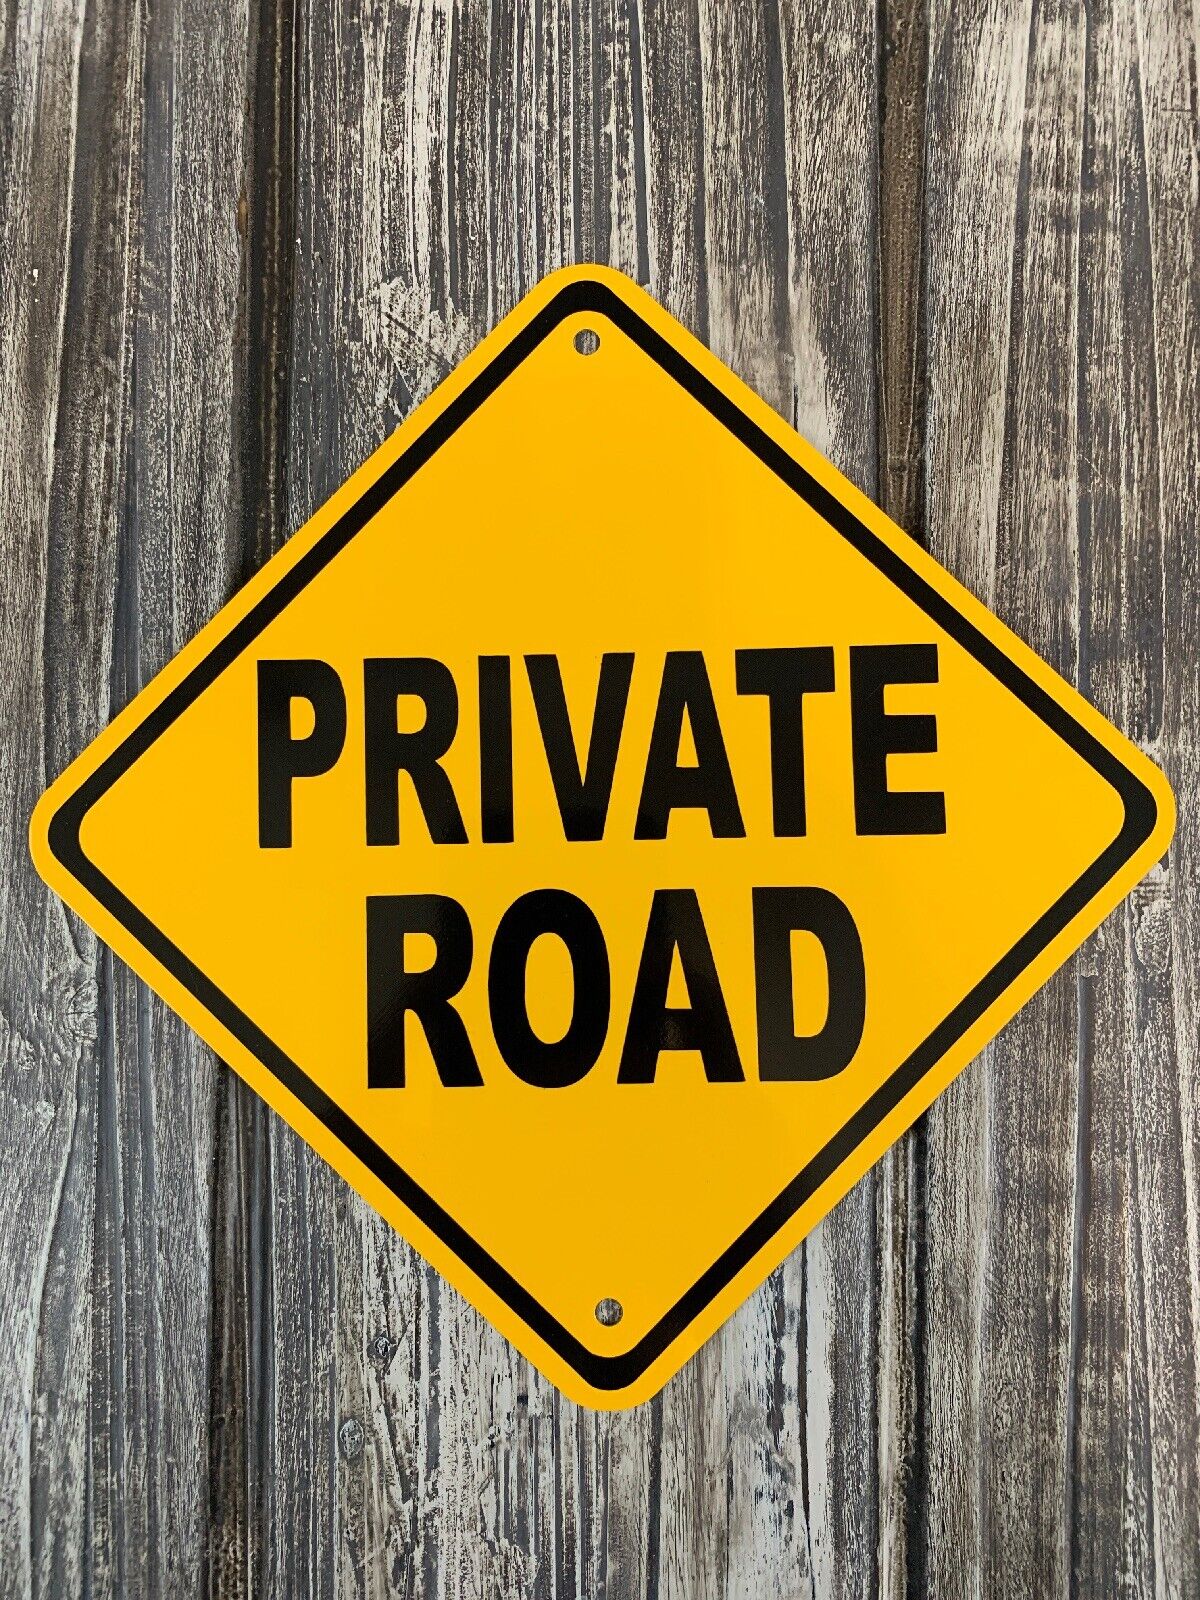 PRIVATE ROAD Metal Caution Yellow Property Sign 6